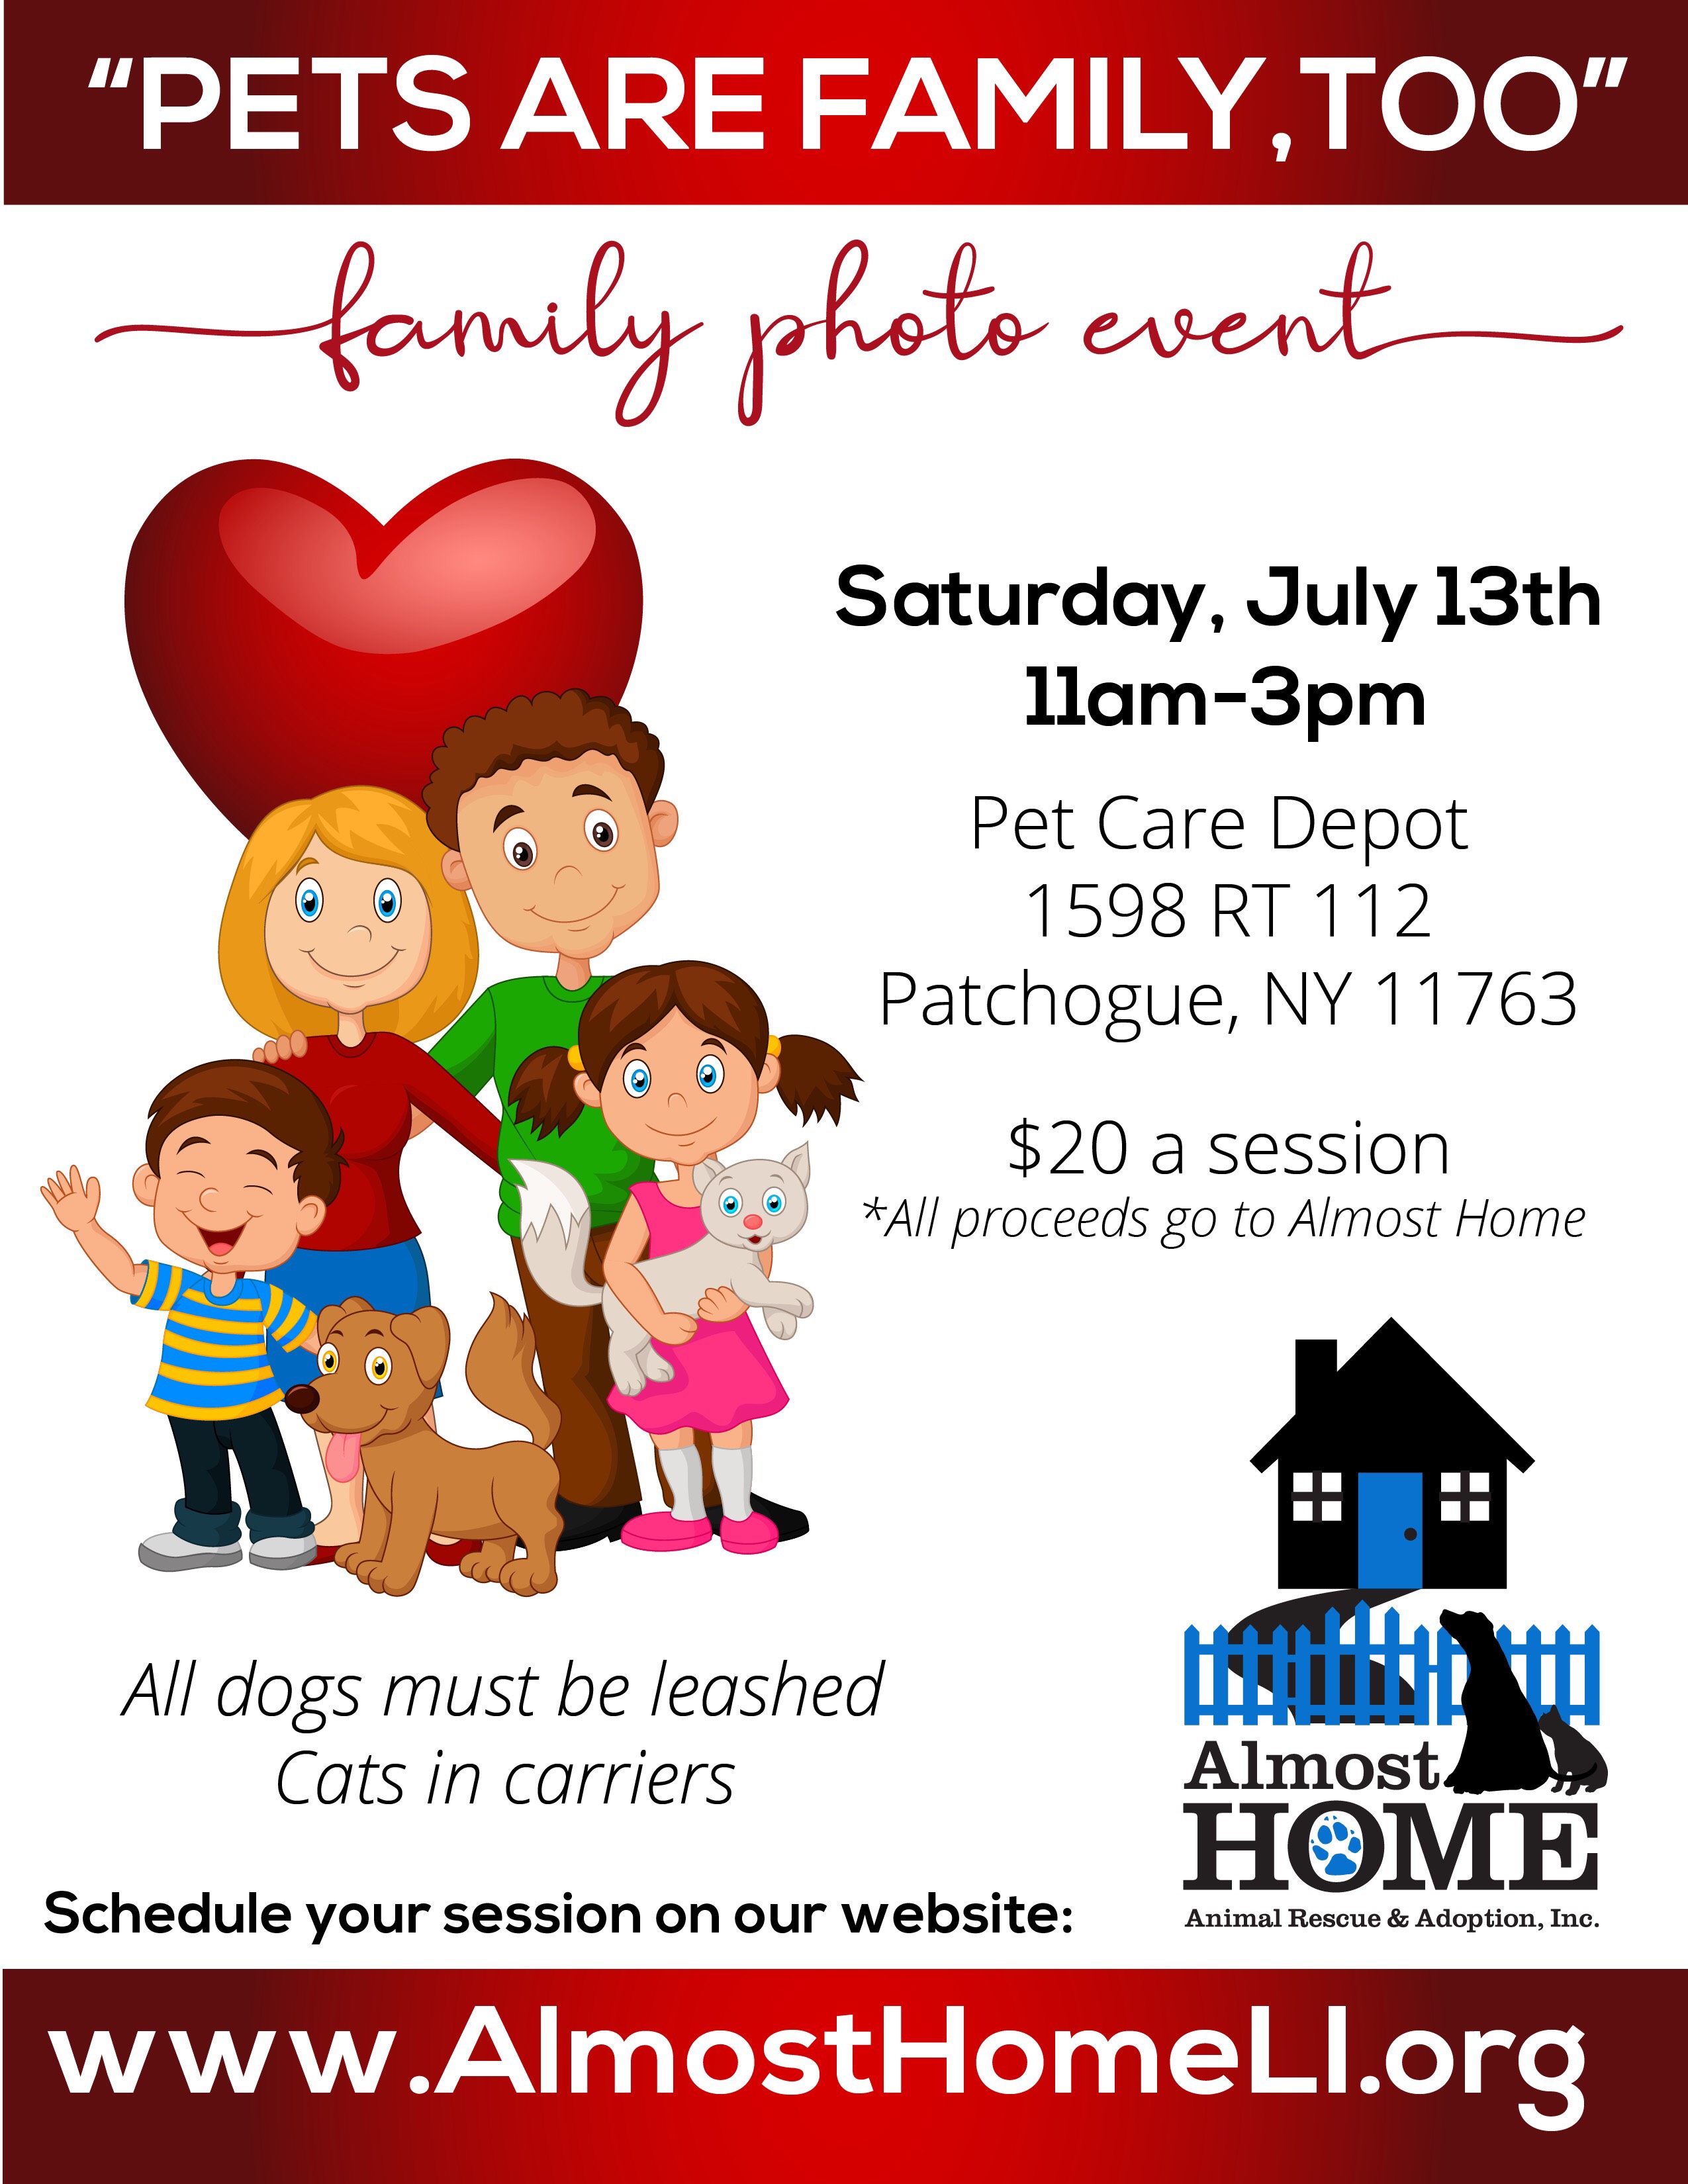 Almost Home Hosts A Family Photo Event!